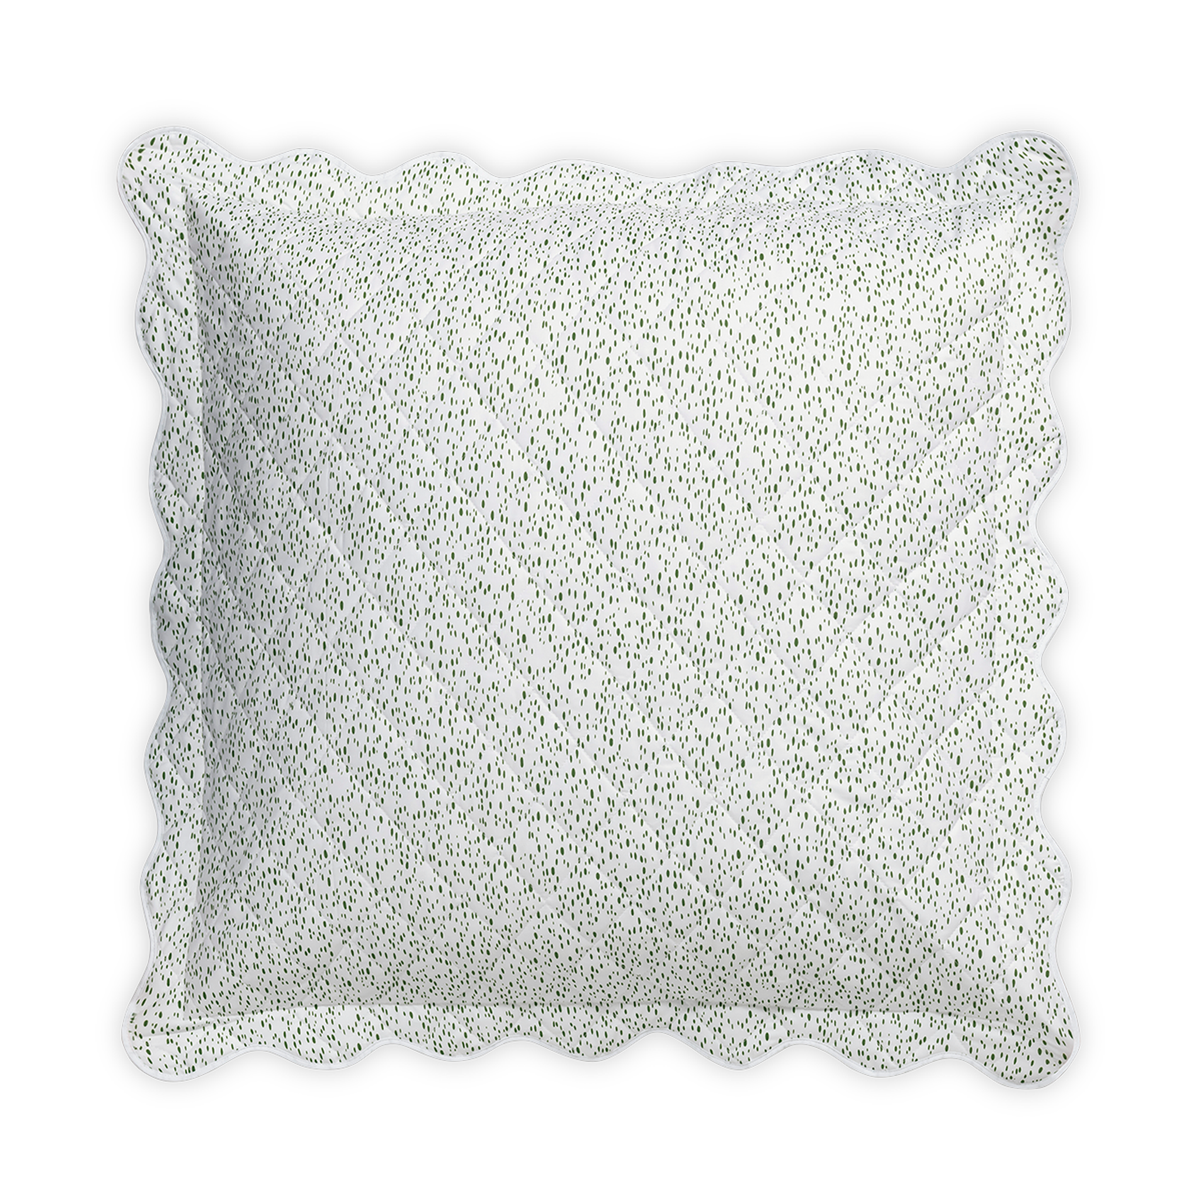 Quilted Euro Sham of Matouk Celine Bedding in Grass Color